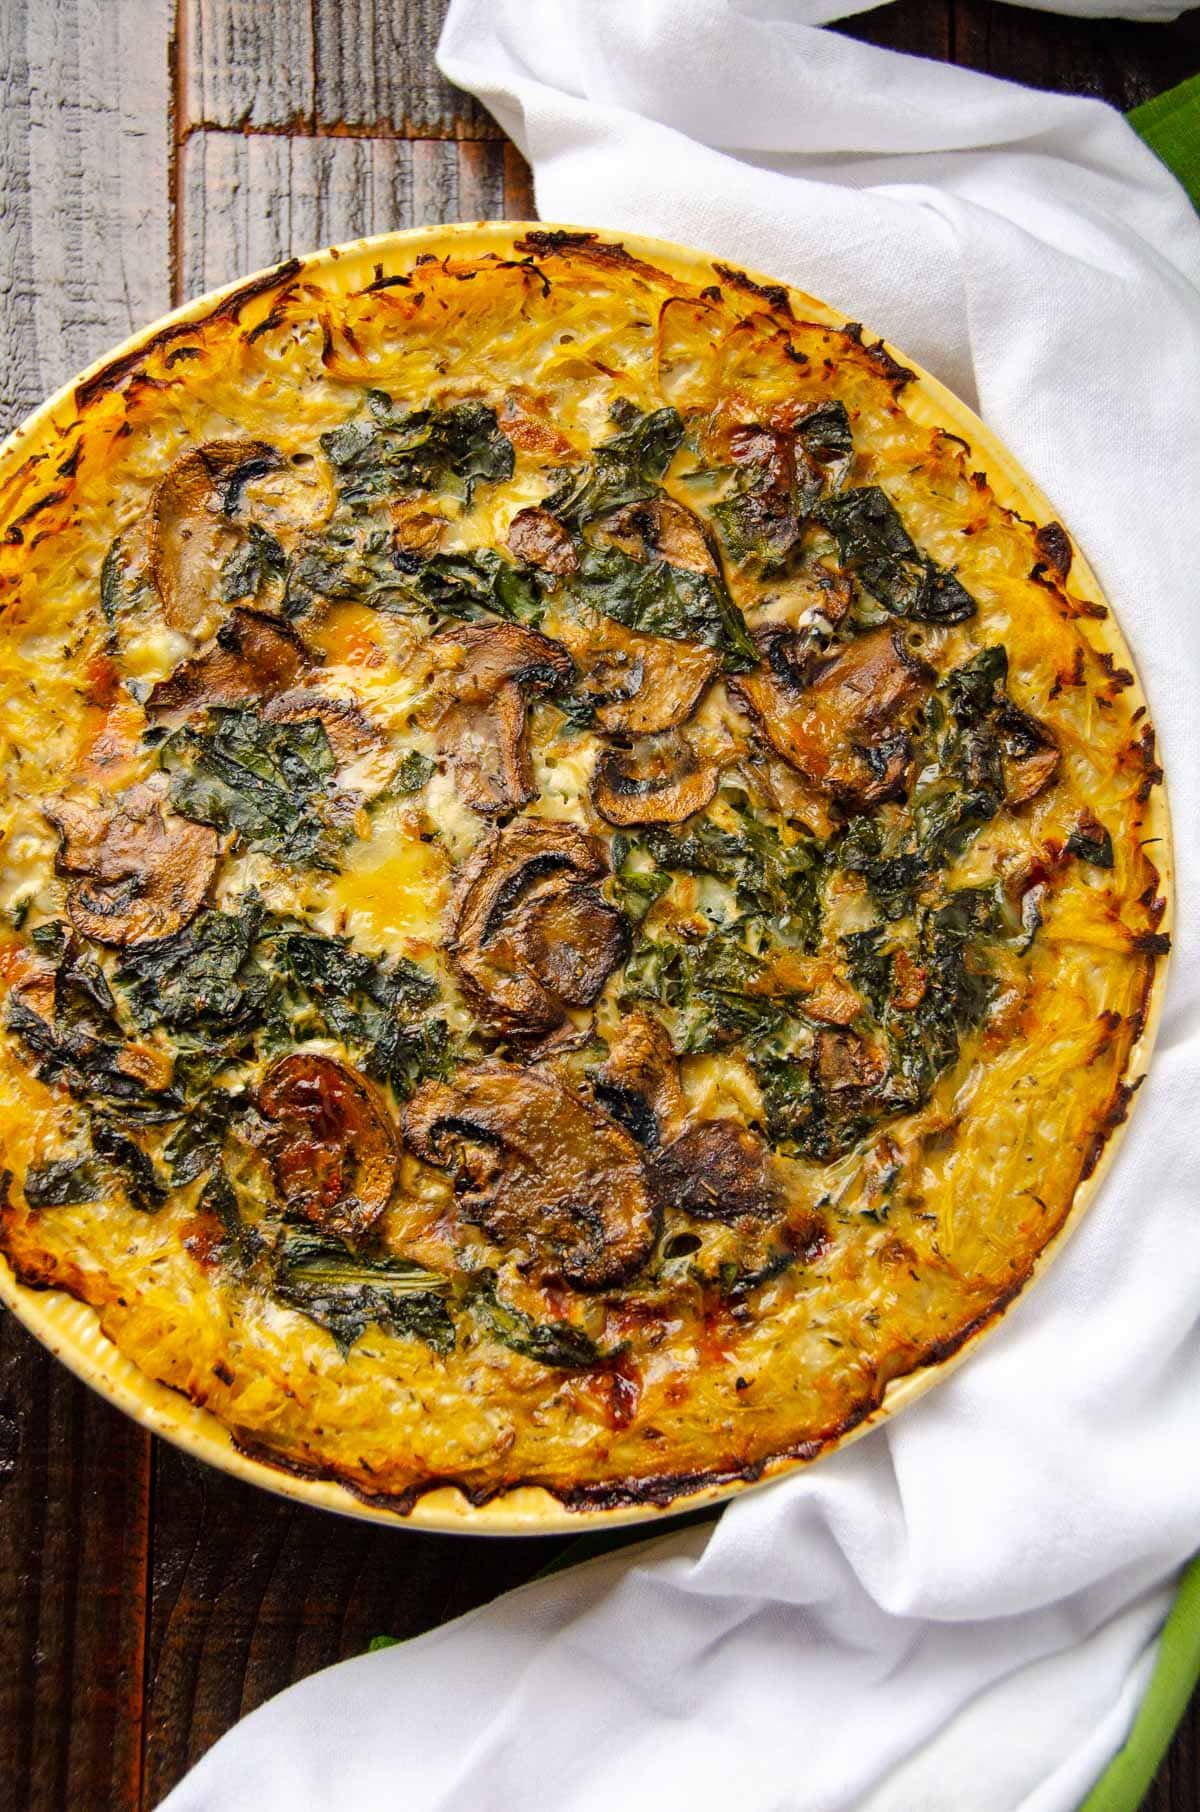 Looking down on baked spaghetti squash quiche with kale and mushrooms in a pie dish.